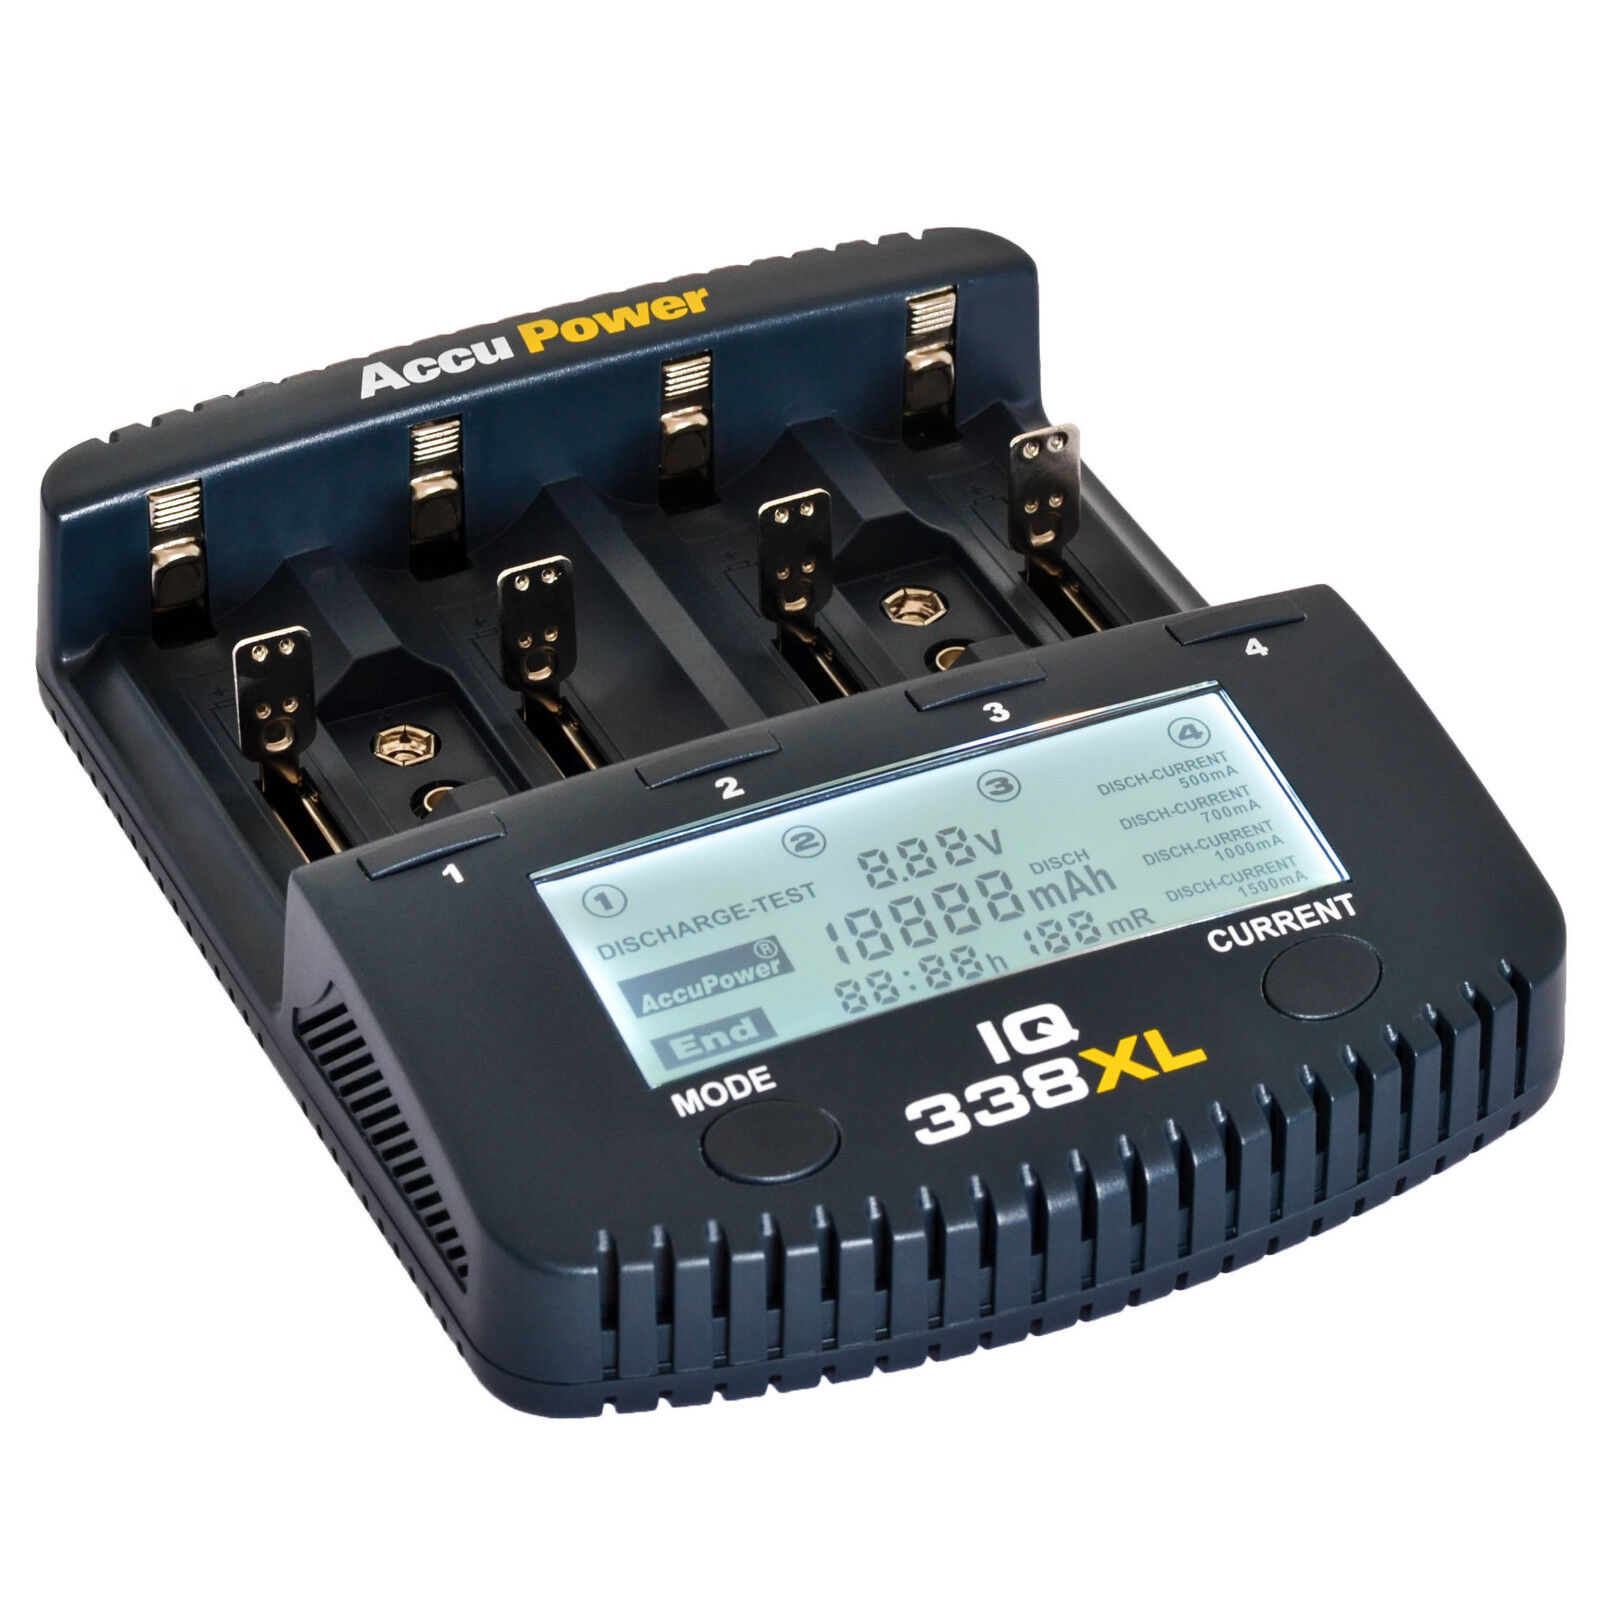 AccuPower IQ338XL Battery Charger Tester Li-ion NiMH NiCd AA AAA C D 9V 18650 